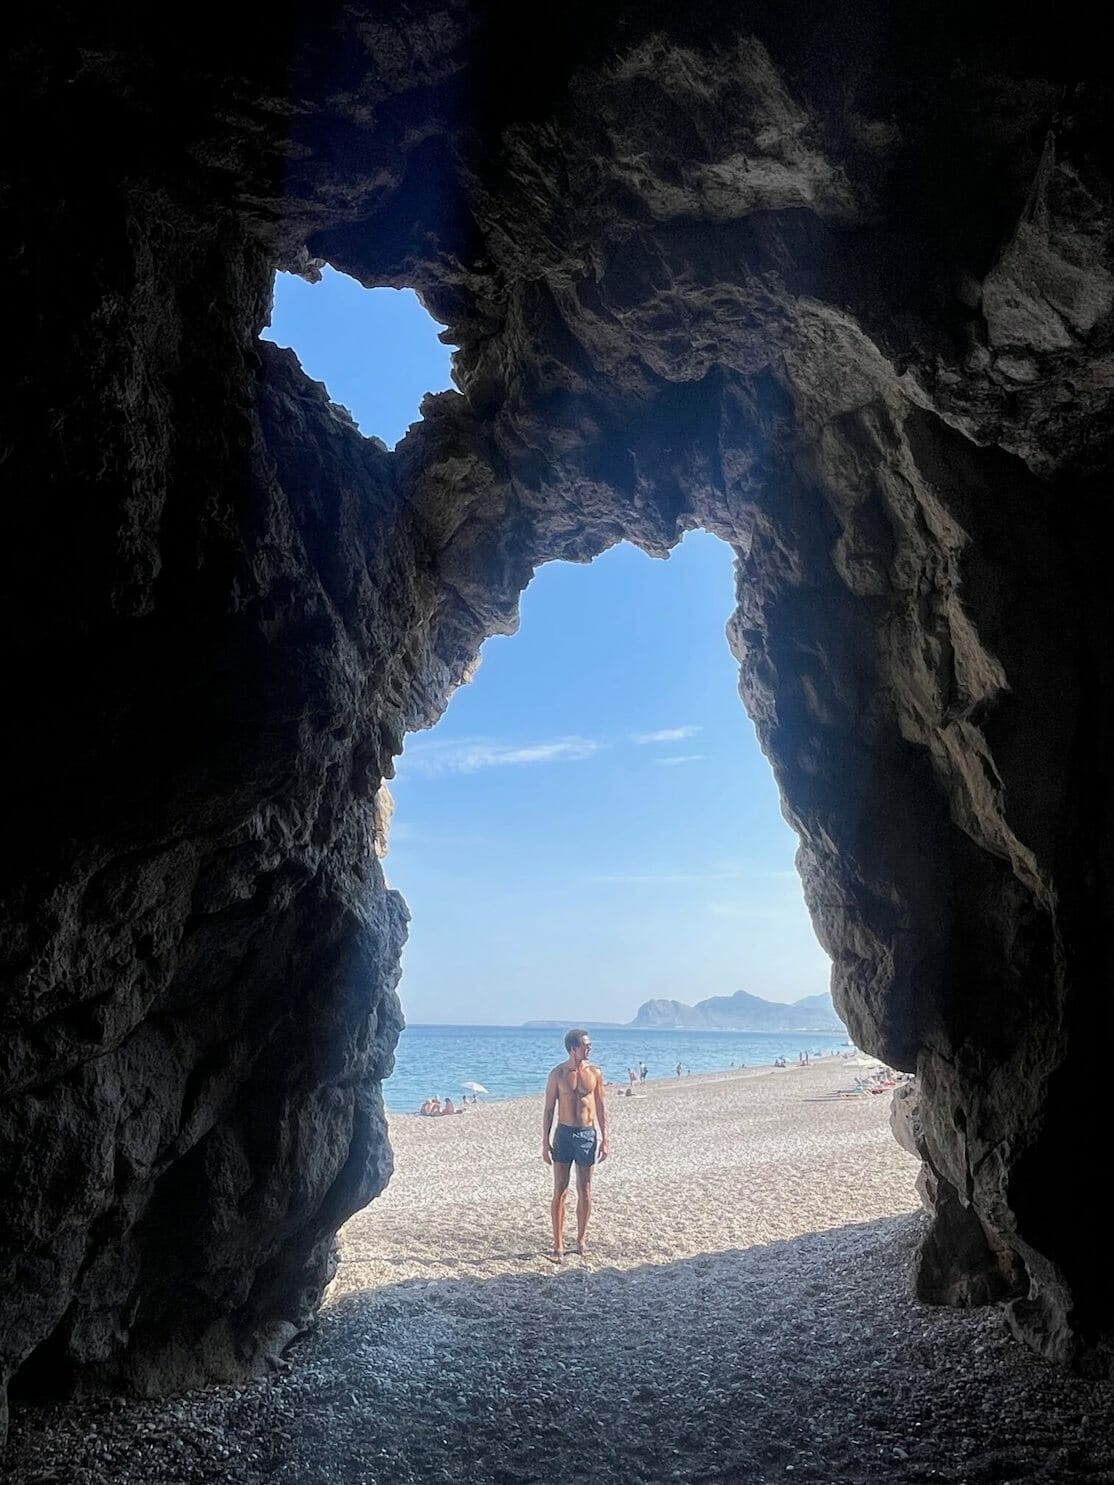 A man posing for a picture at Traganou Beach cave, Rhodes, Greece